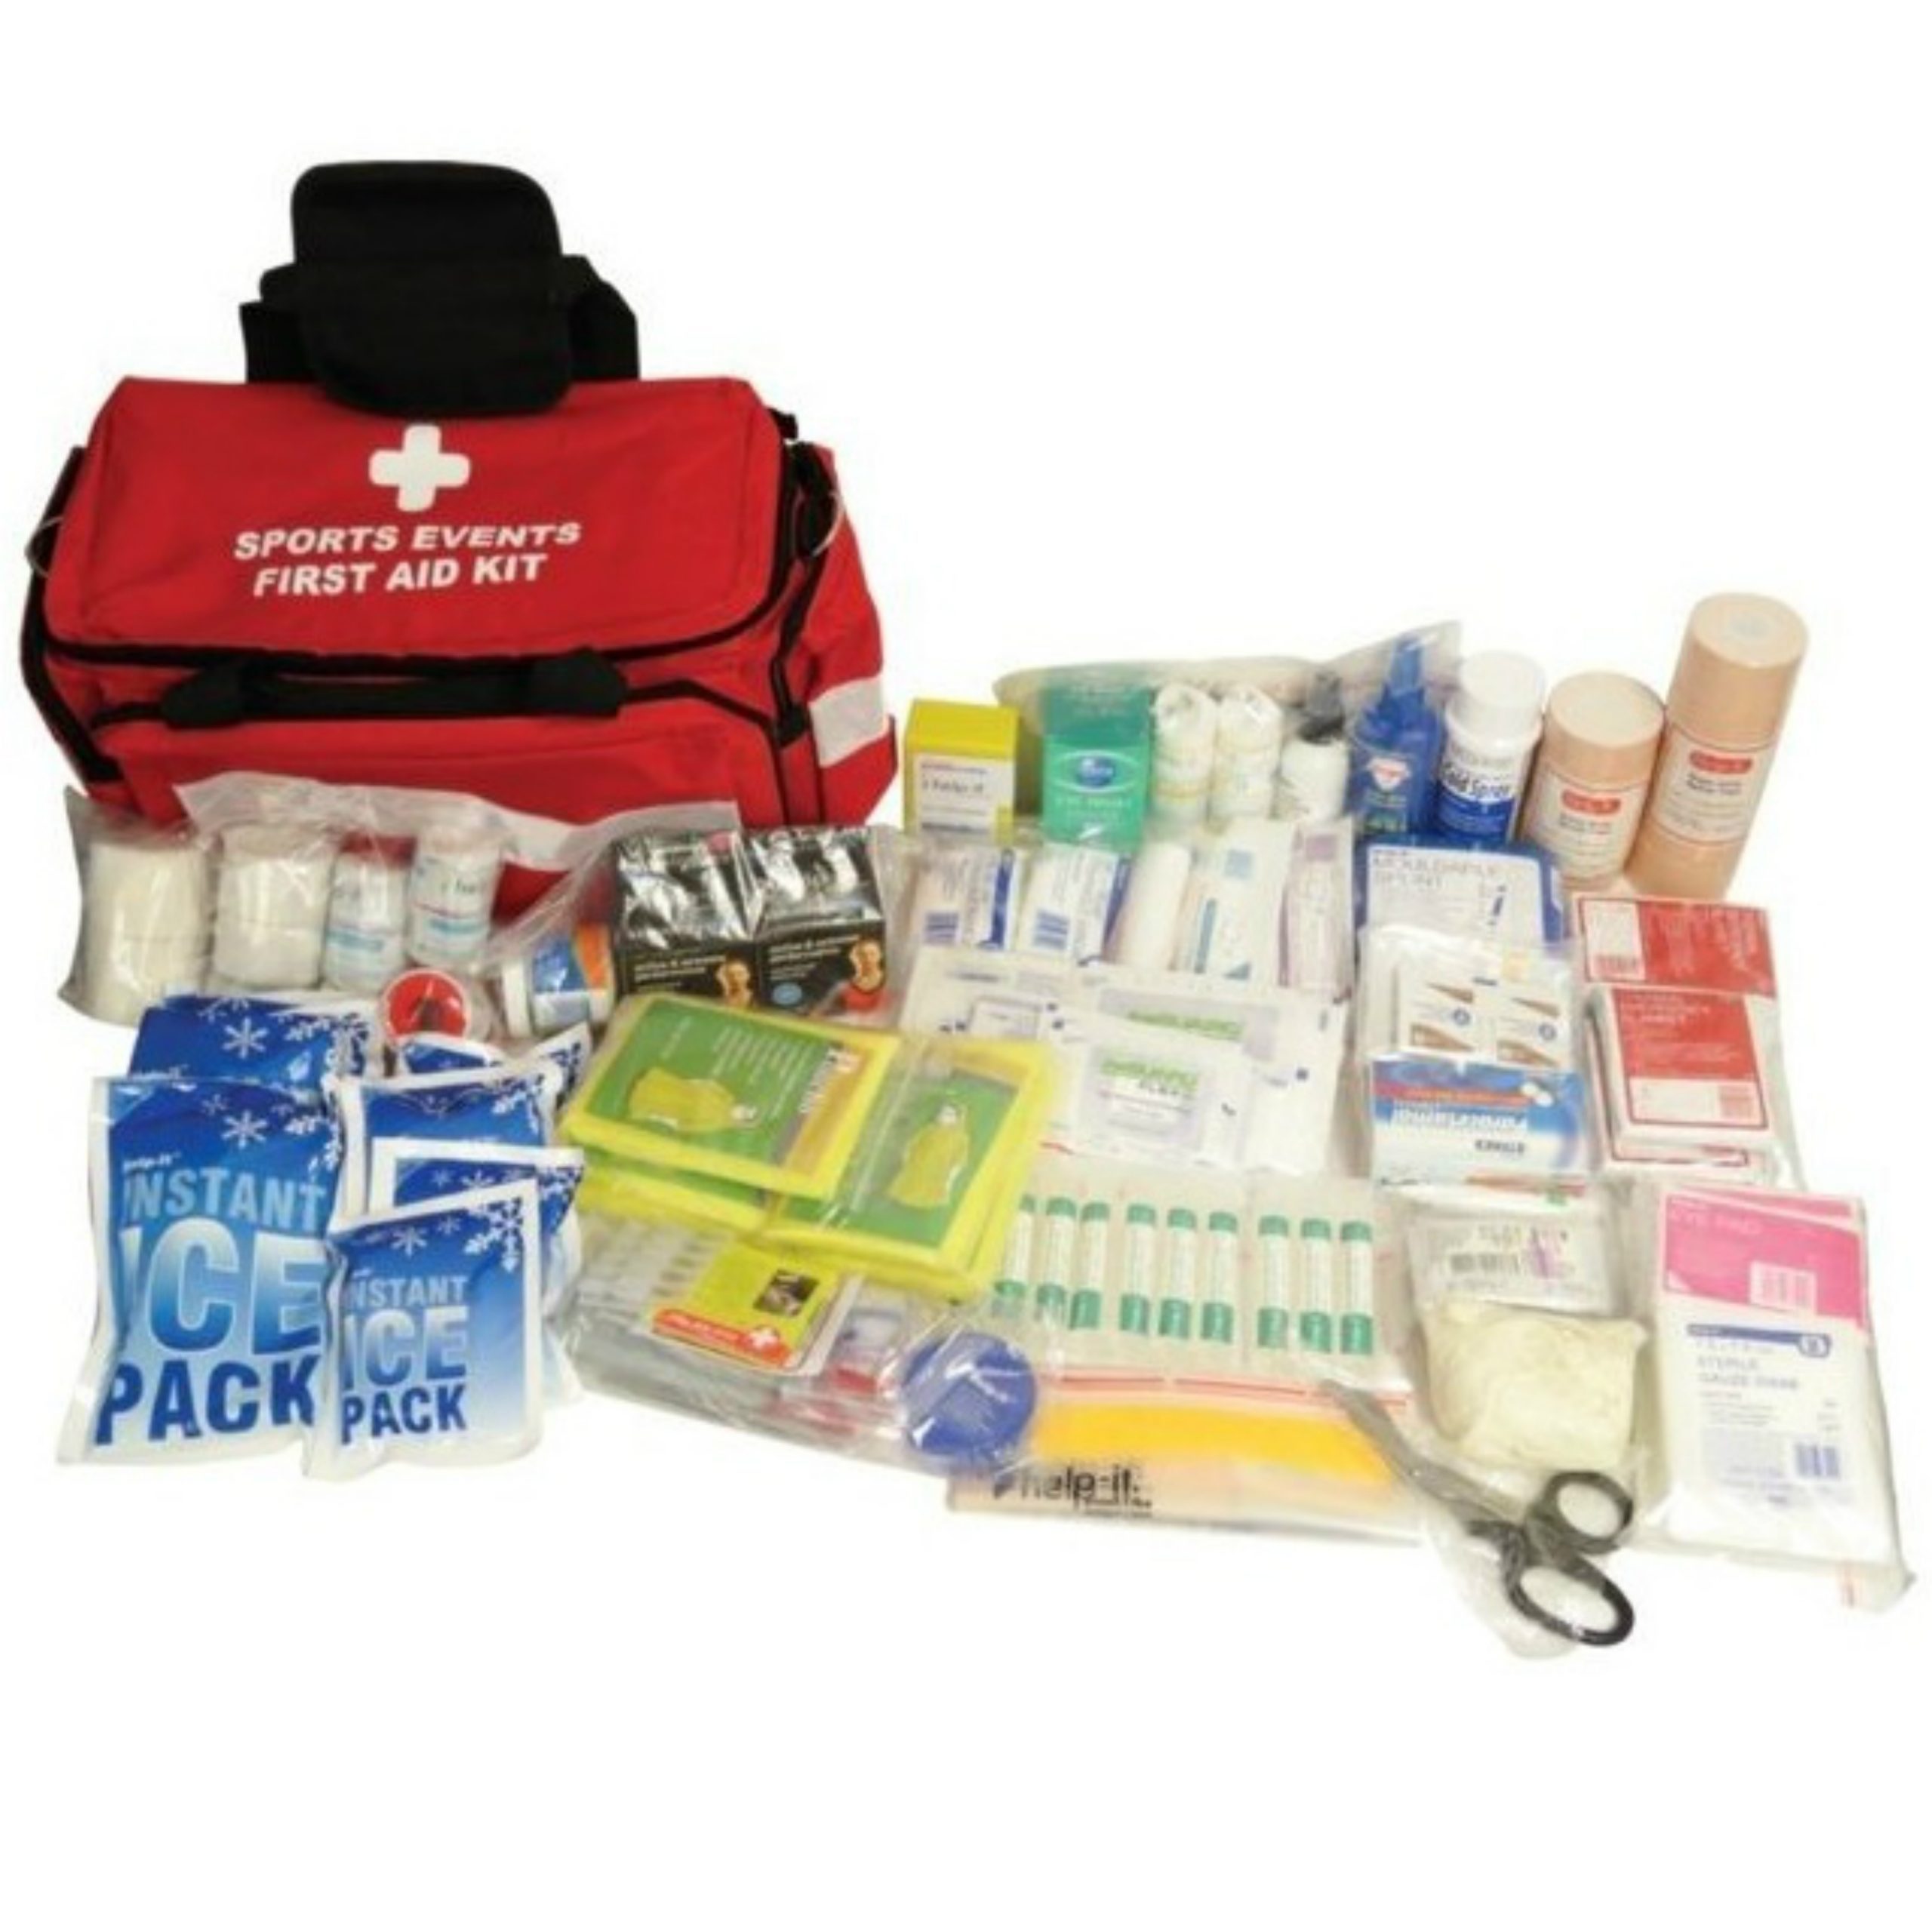 10 essential items for your sports first aid kit